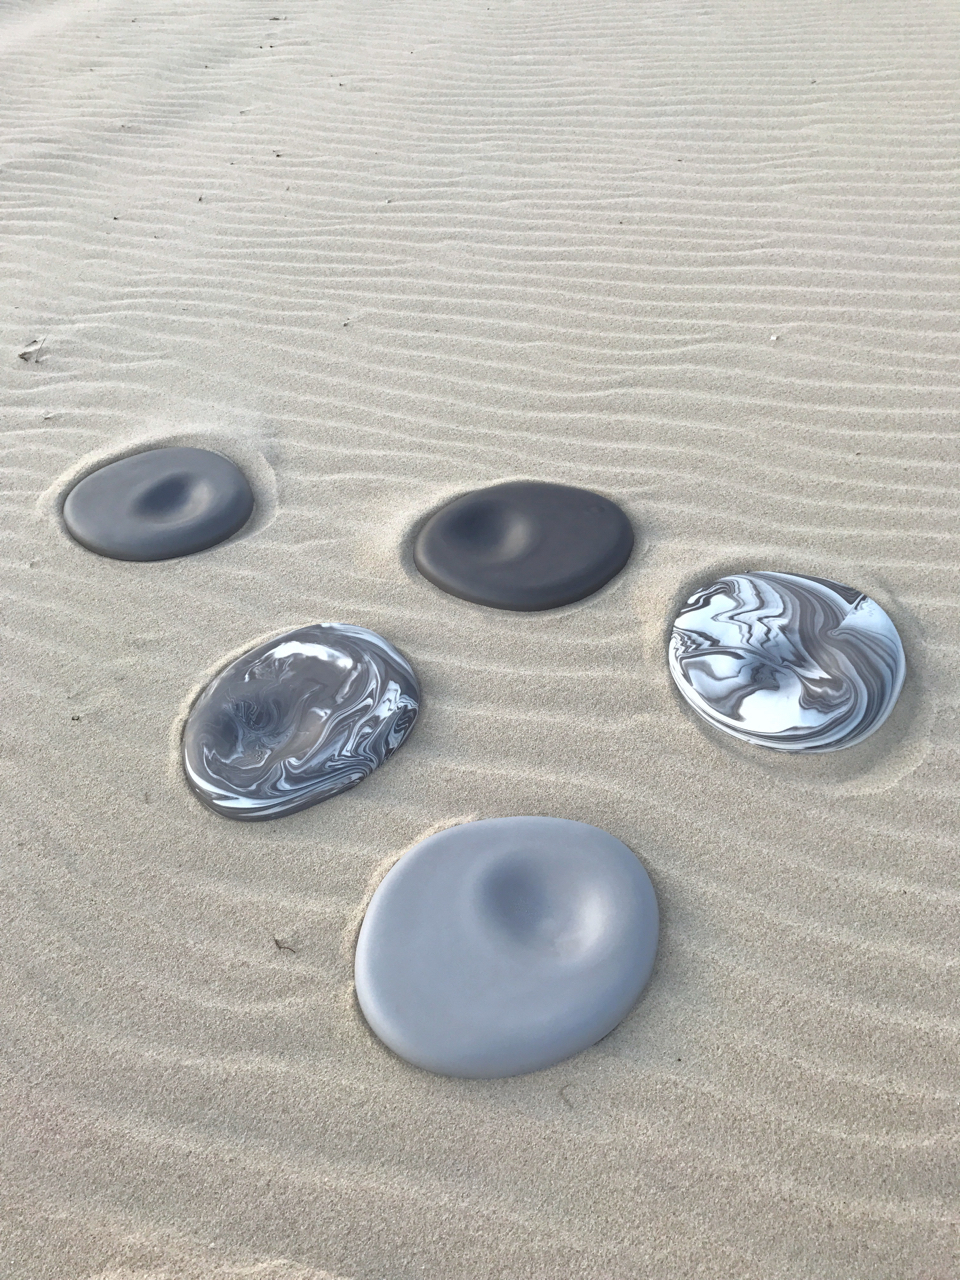 BesteOgan double-sided platters at the beach